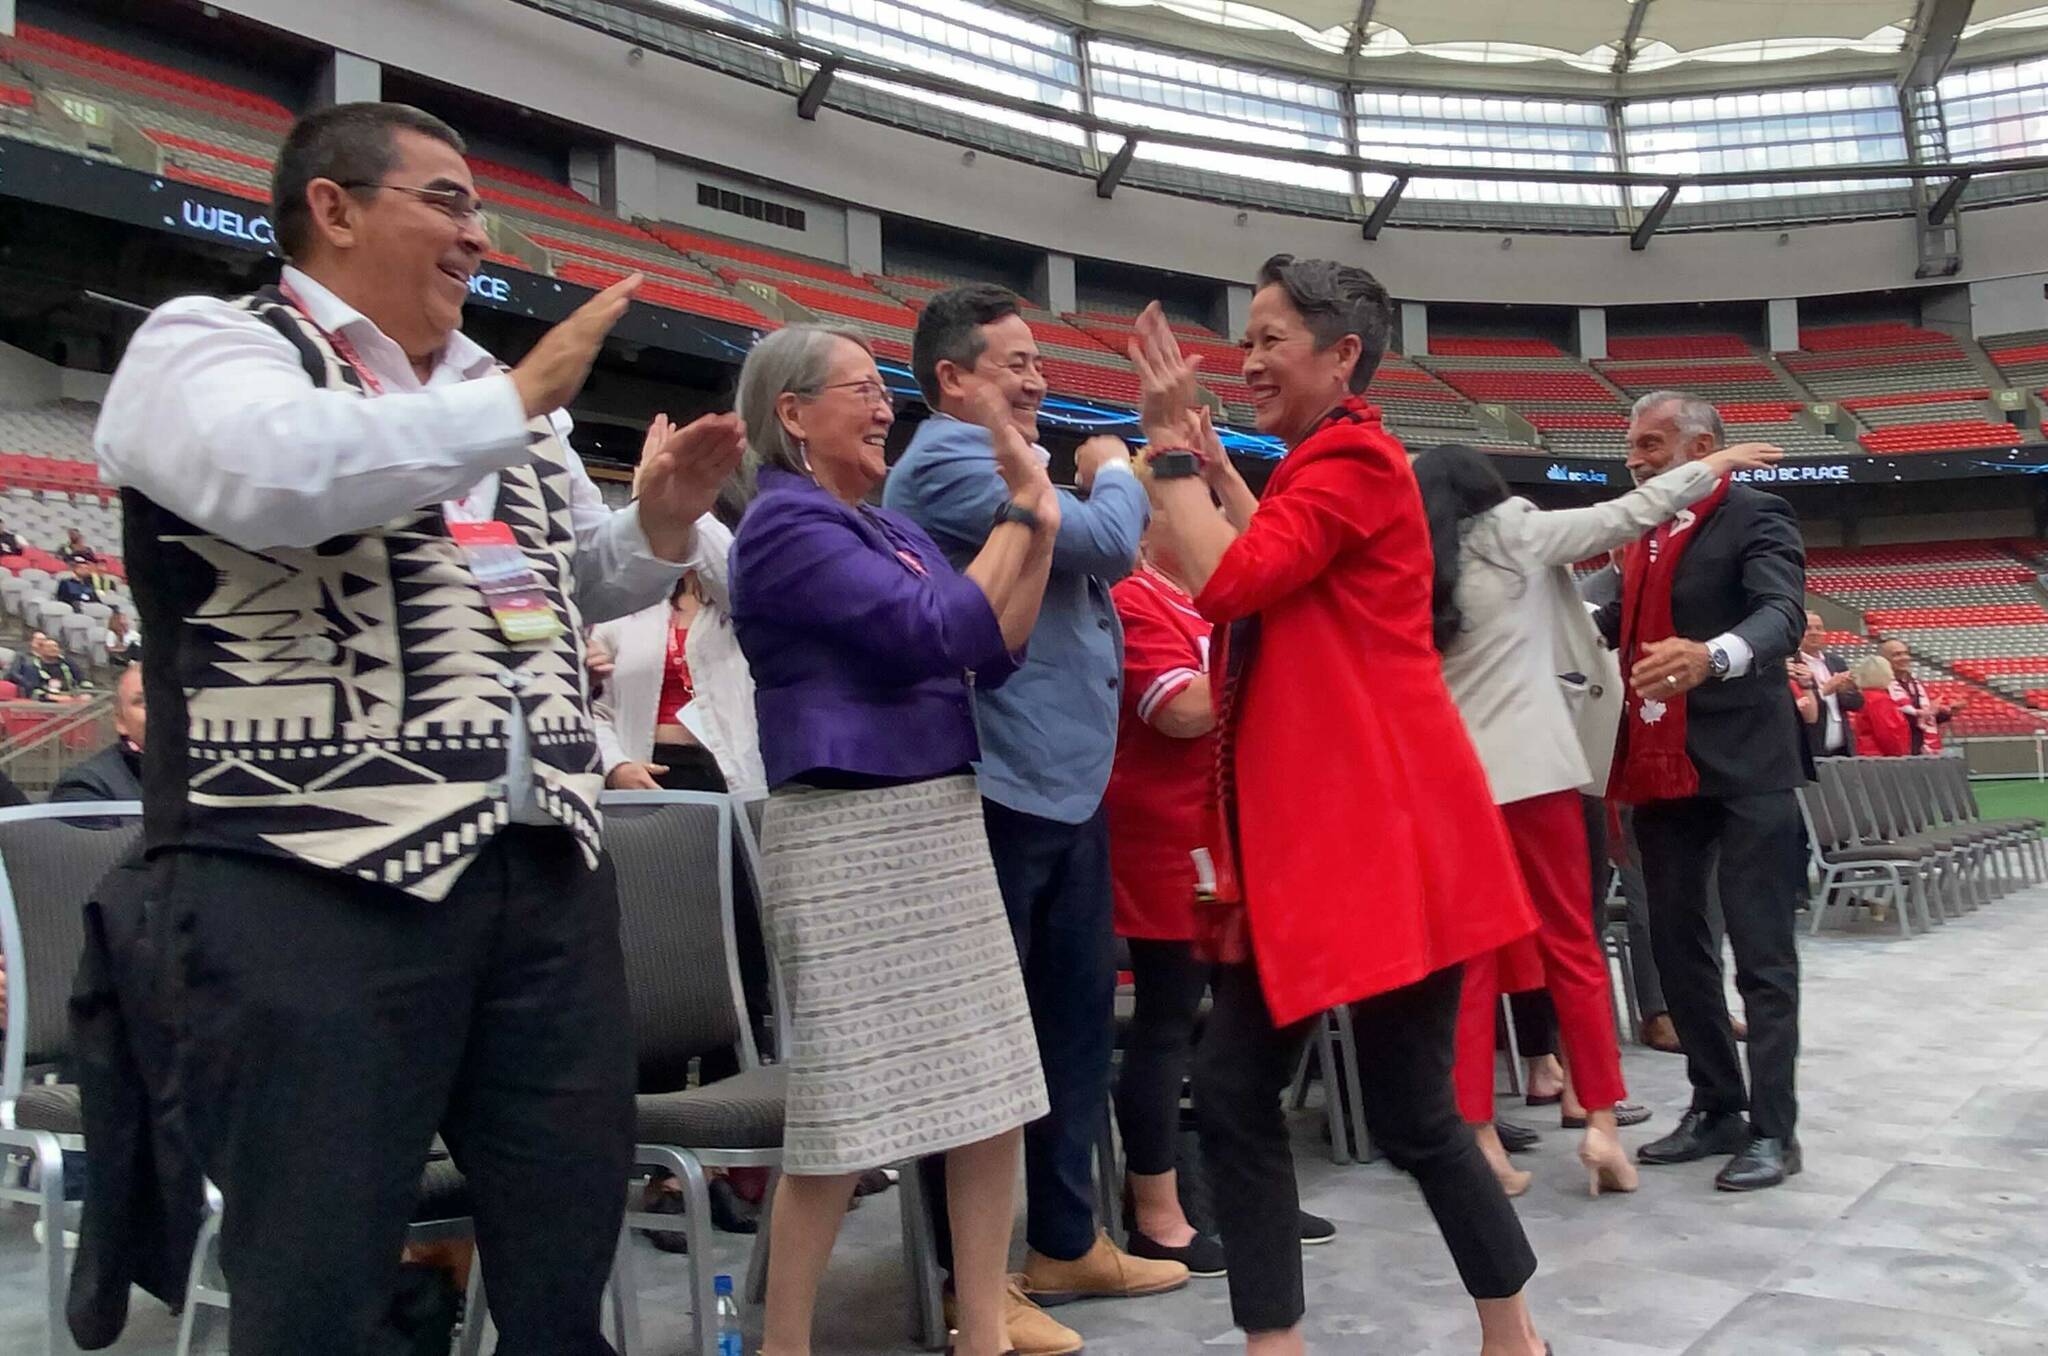 Cheers broke out at B.C. Place on Thursday (June 16, 2022) as Vancouver was selected as a 2026 FIFA World Cup host city as part of a North American joint bid. (Cole Schisler/Black Press Media)